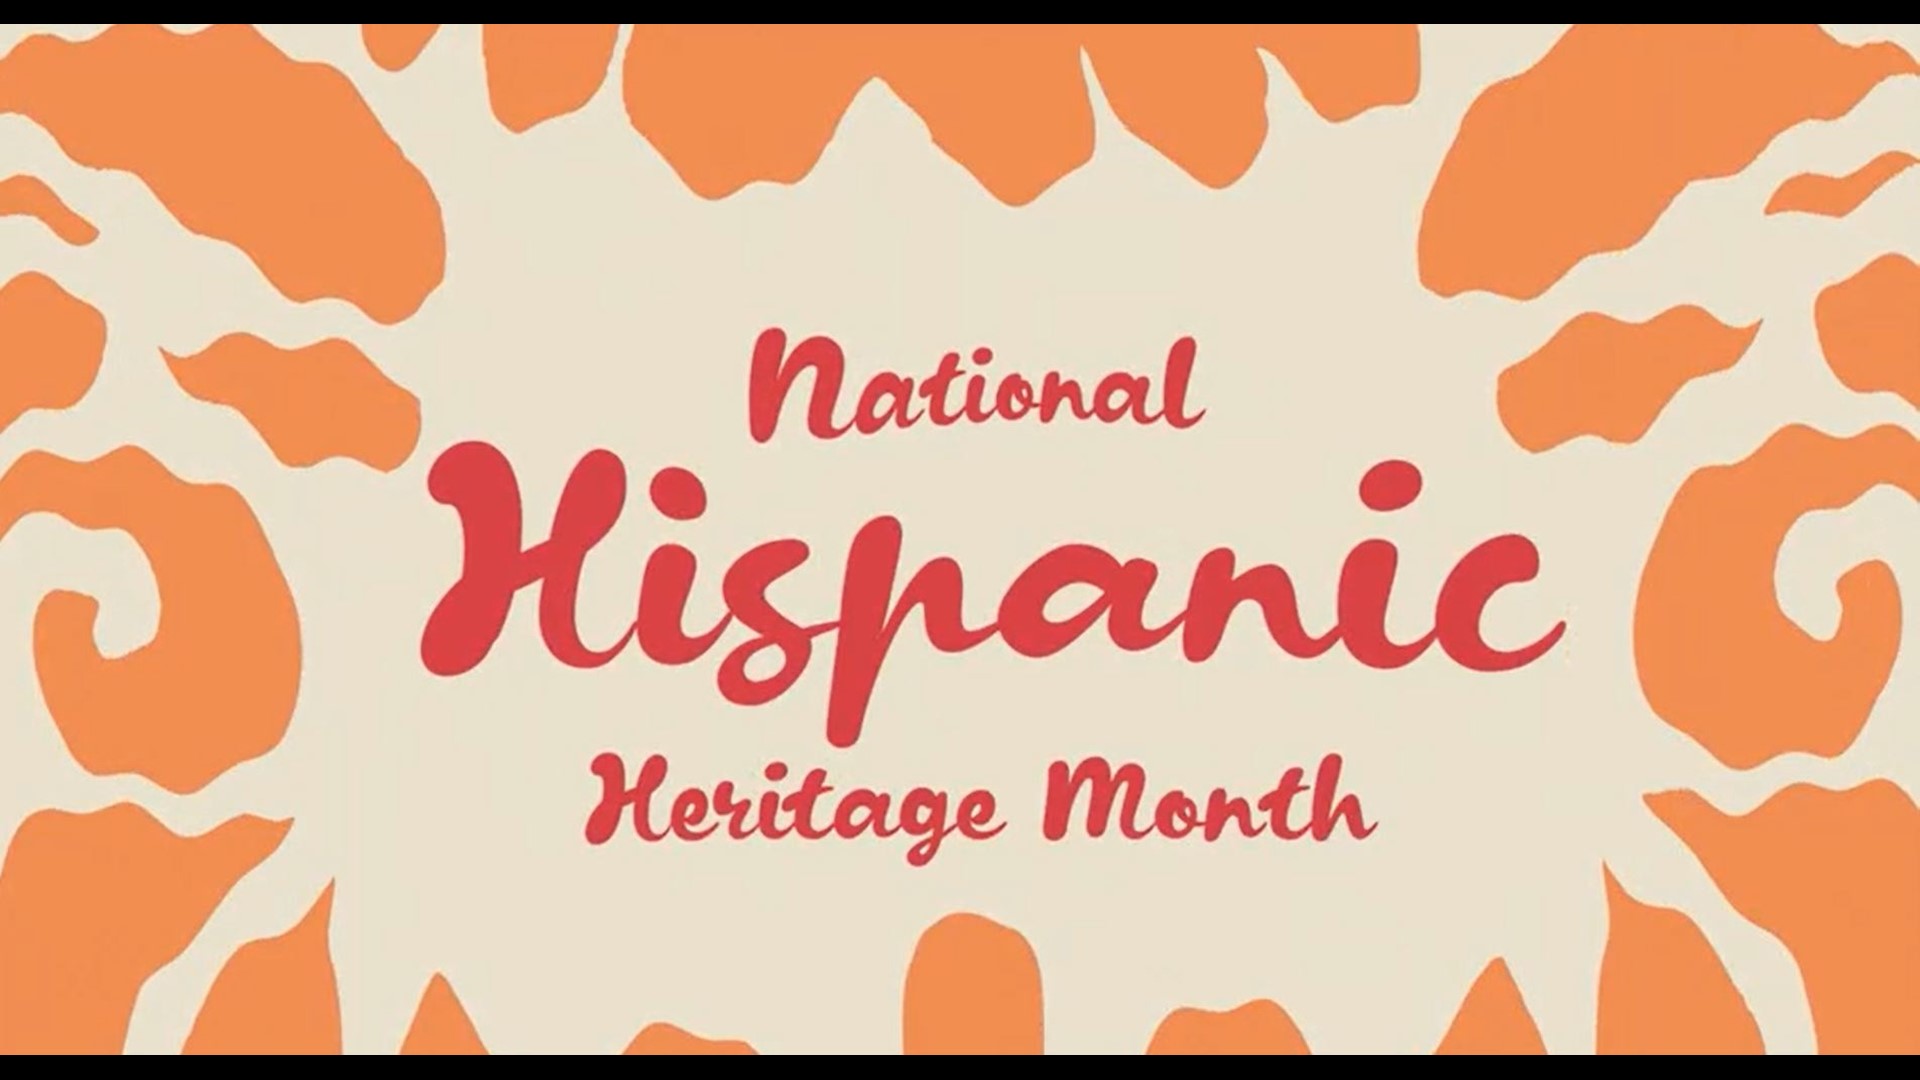 Hispanic Heritage Month is September 15 - October 15 each year. It's a time to celebrate the culture, achievements and progress of Latino and Hispanic communities.